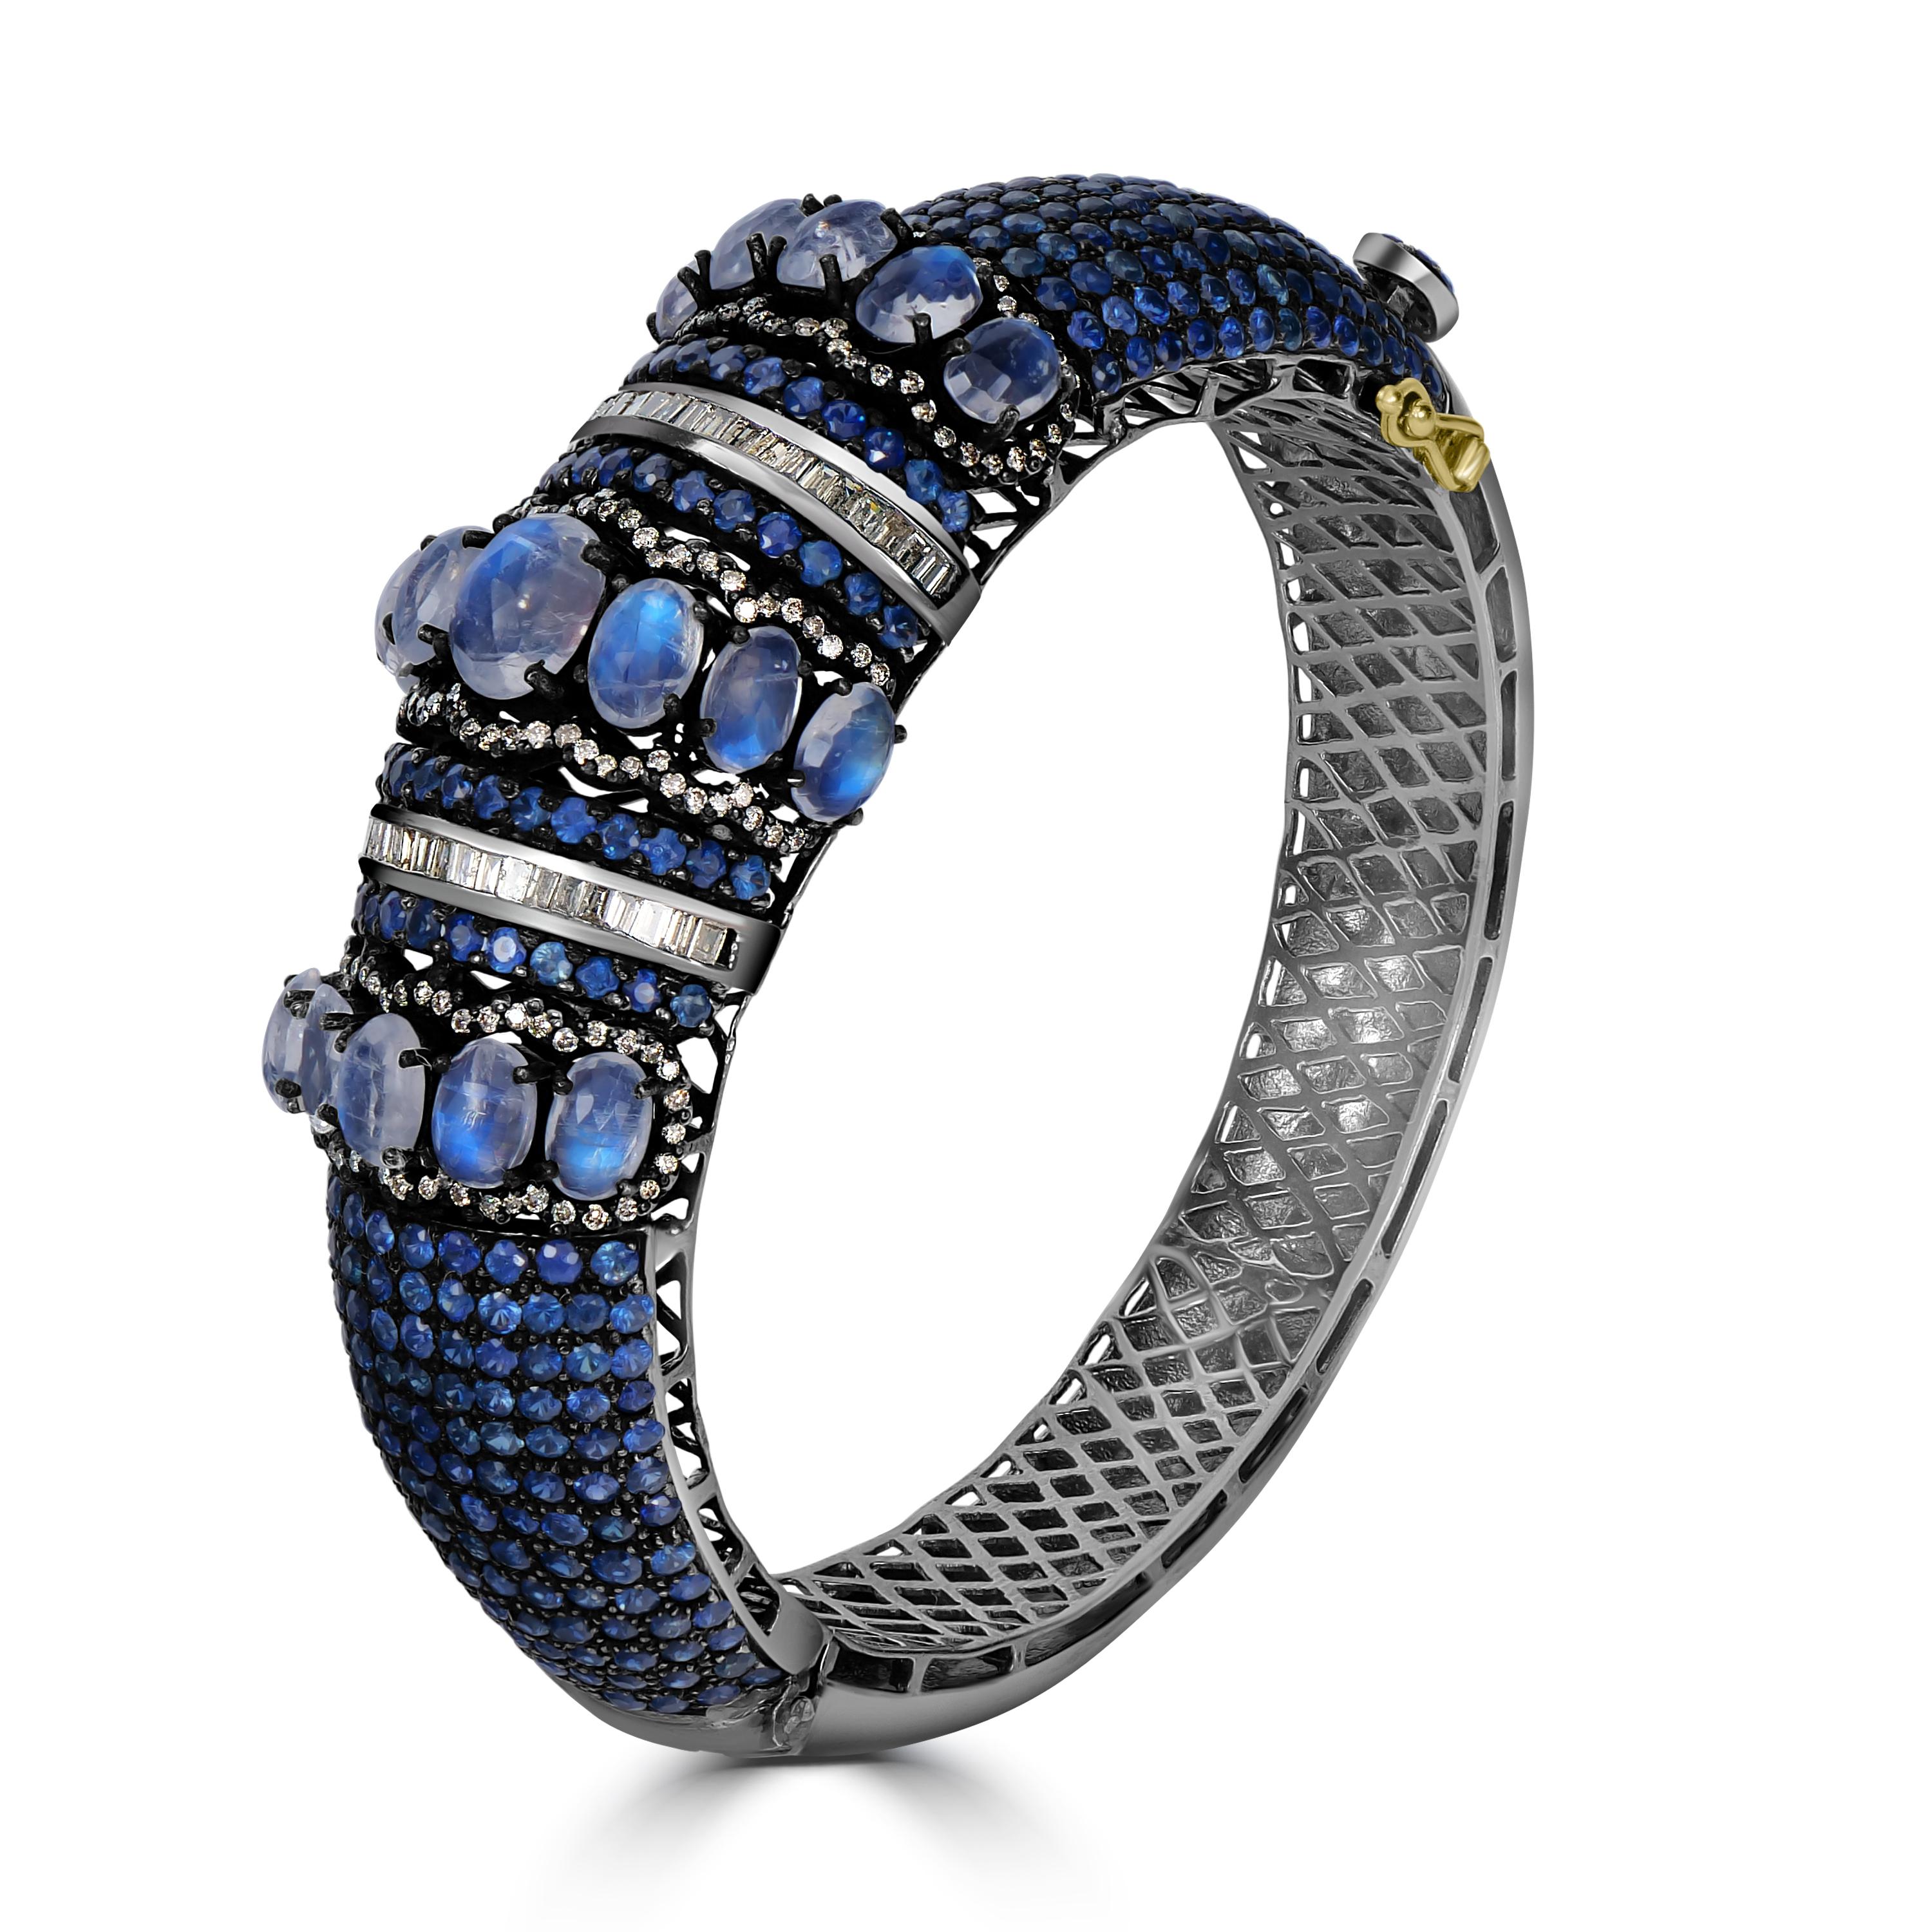 Introducing our Victorian 18.9 Cttw. Rainbow Moonstone, Blue Sapphire, and Diamond Bangle, a true testament to Victorian-era elegance and opulence.

This exquisite Victorion bangle boasts a stunning combination of gemstones, meticulously arranged to